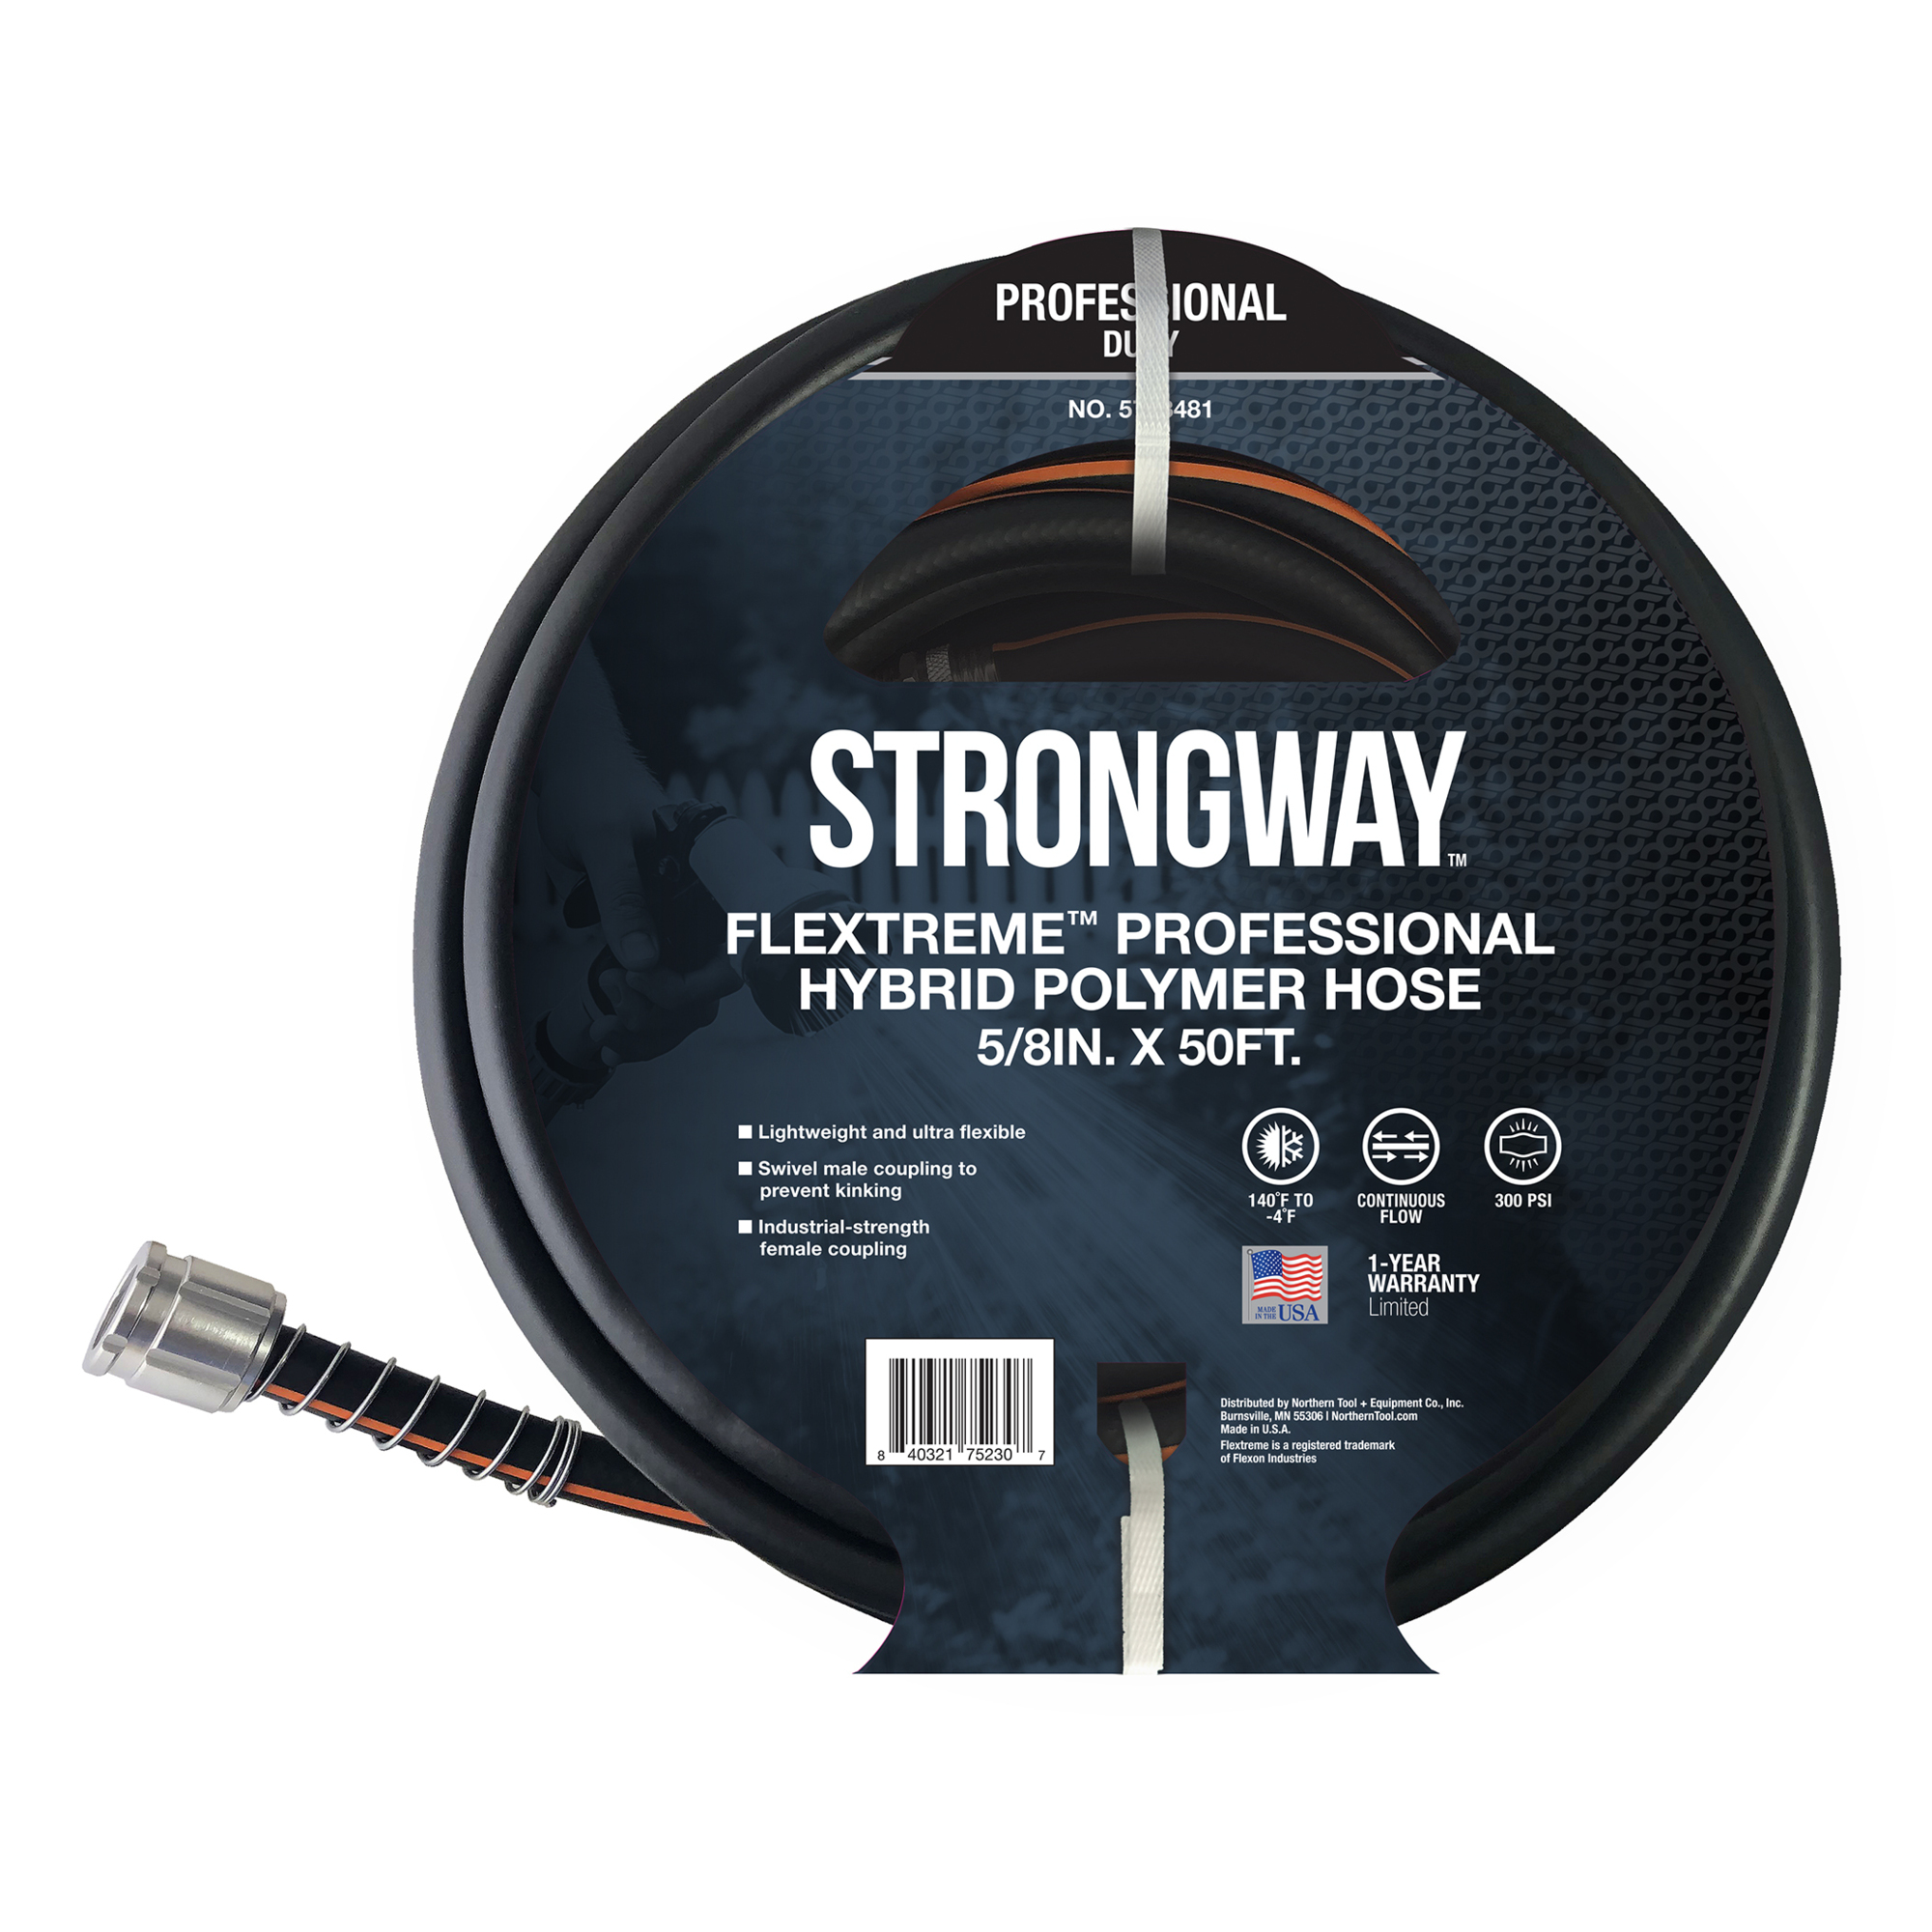 Strongway Flextreme Professional Water Hose, 5/8Inch x 50ft., 220 PSI, Model FLXP5850SW